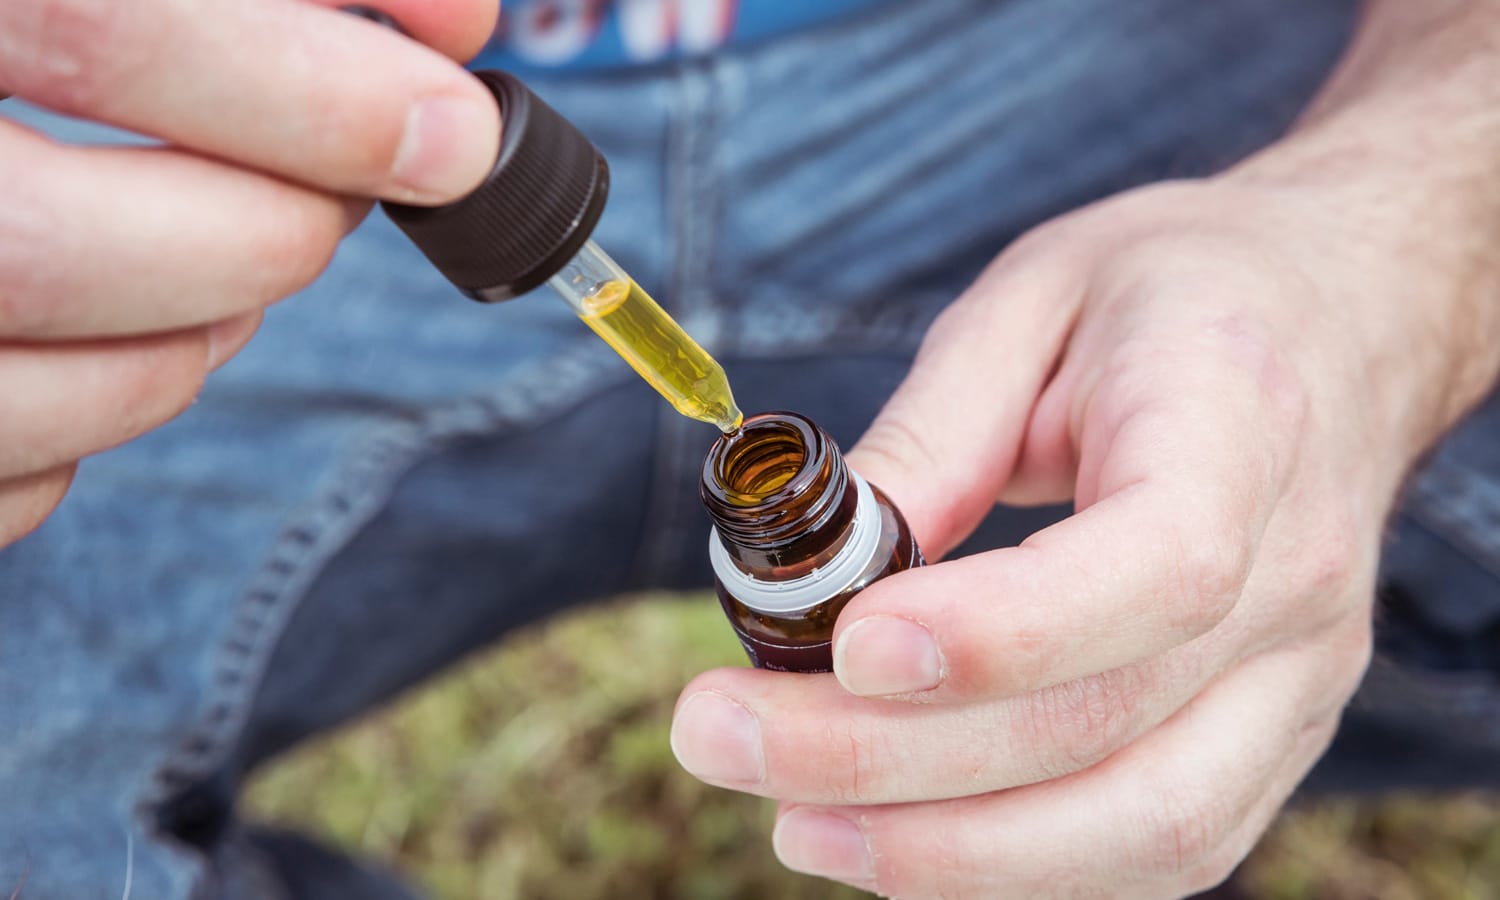 Don’t Believe Most Of What You Read About CBD Laws Online